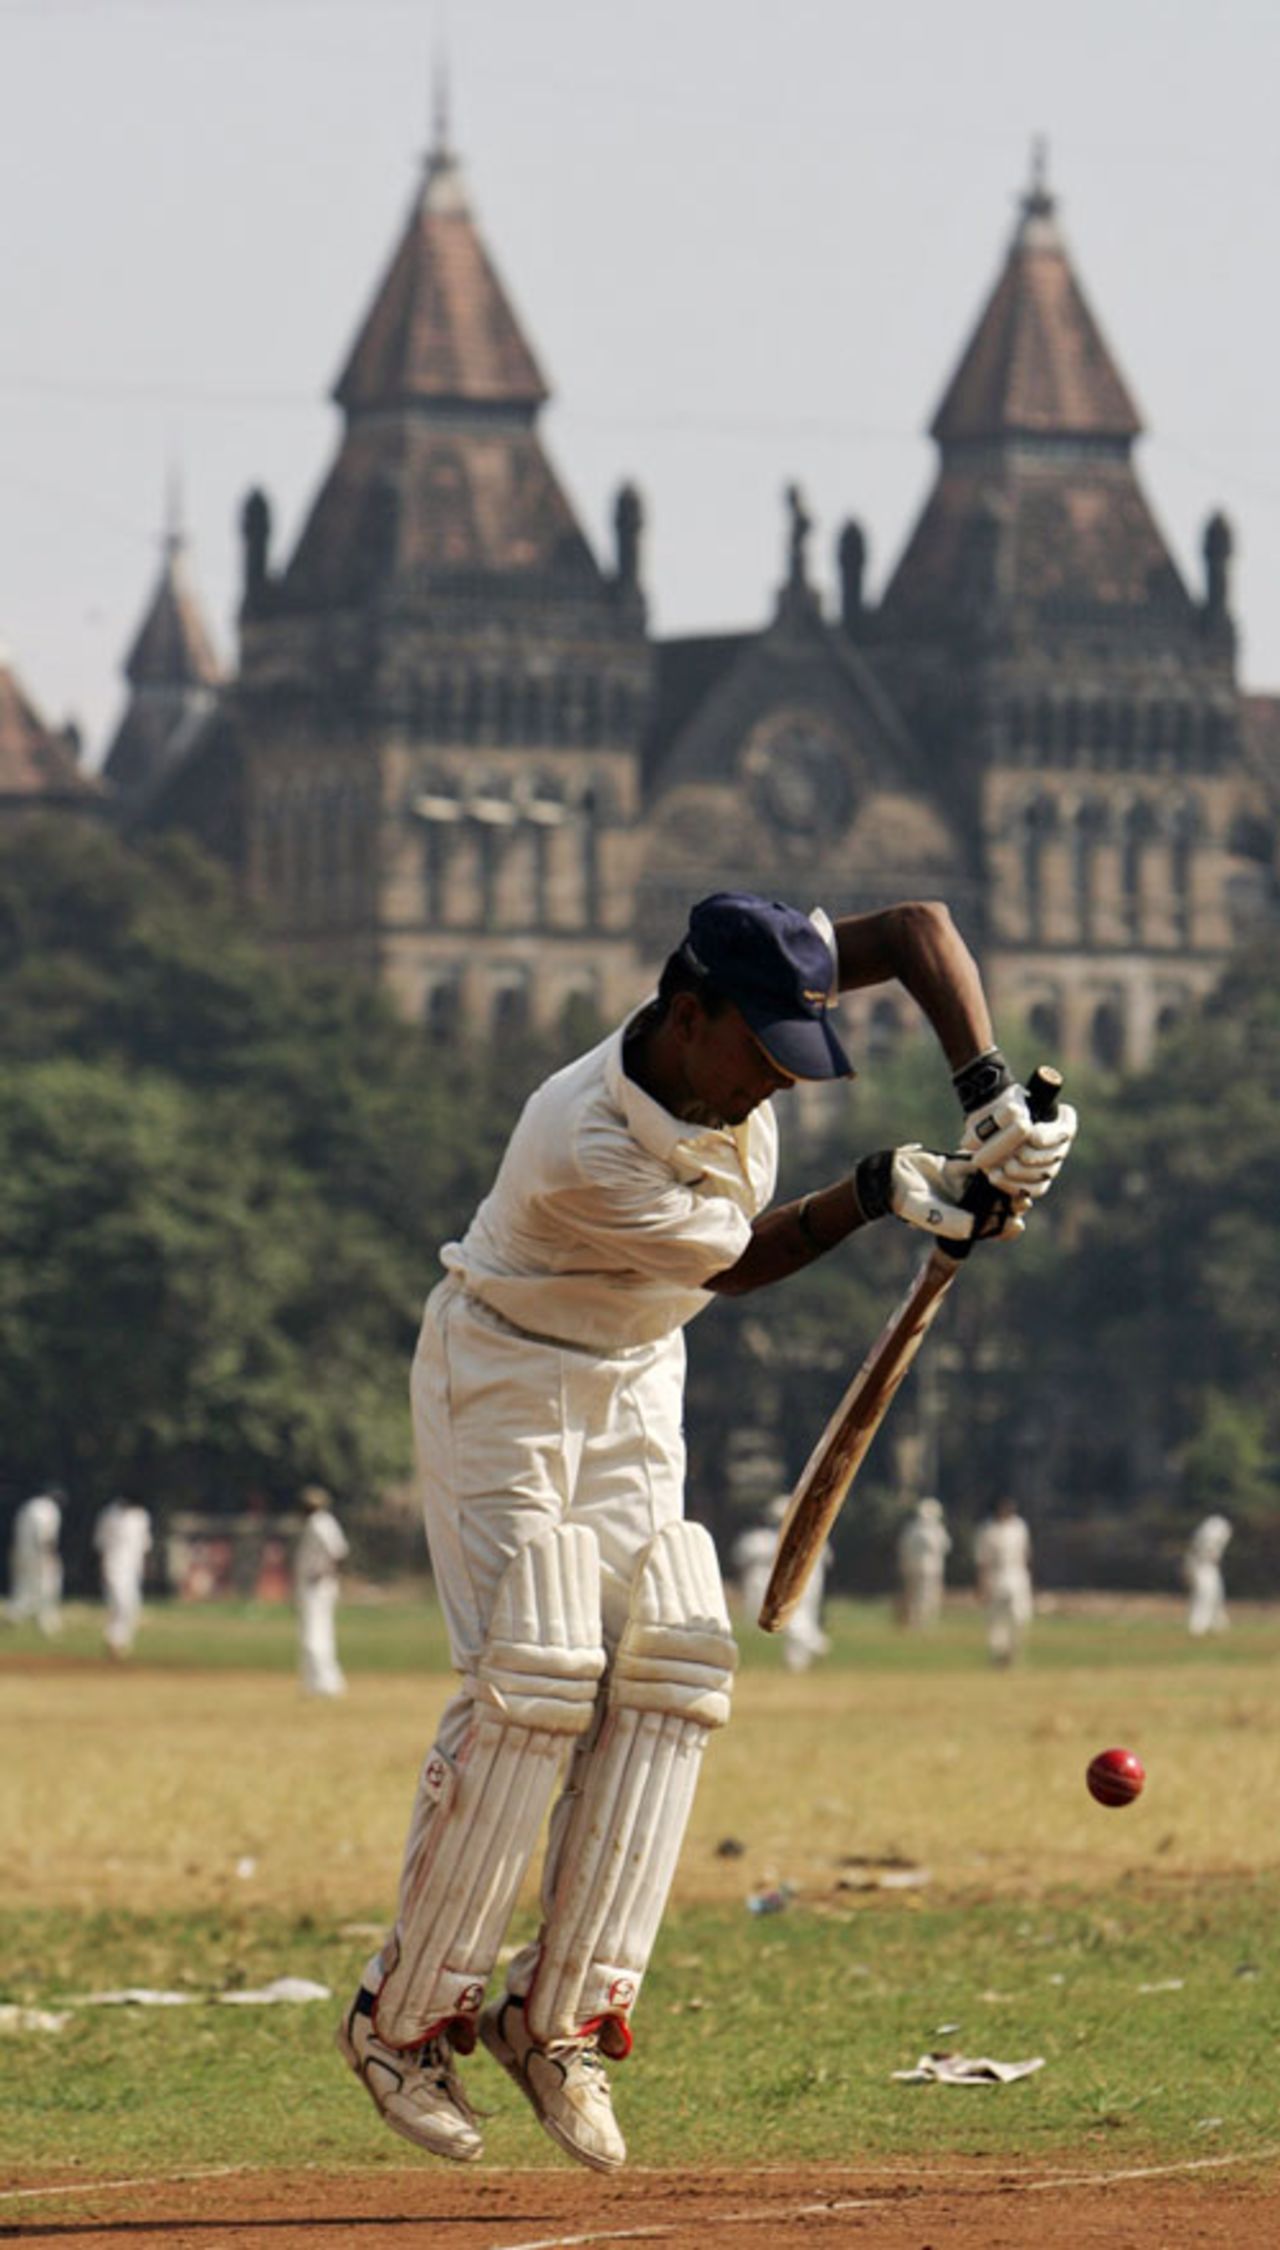 Cricket in the park against the backdrop of the Bombay High Court, Mumbai, December 2, 2008